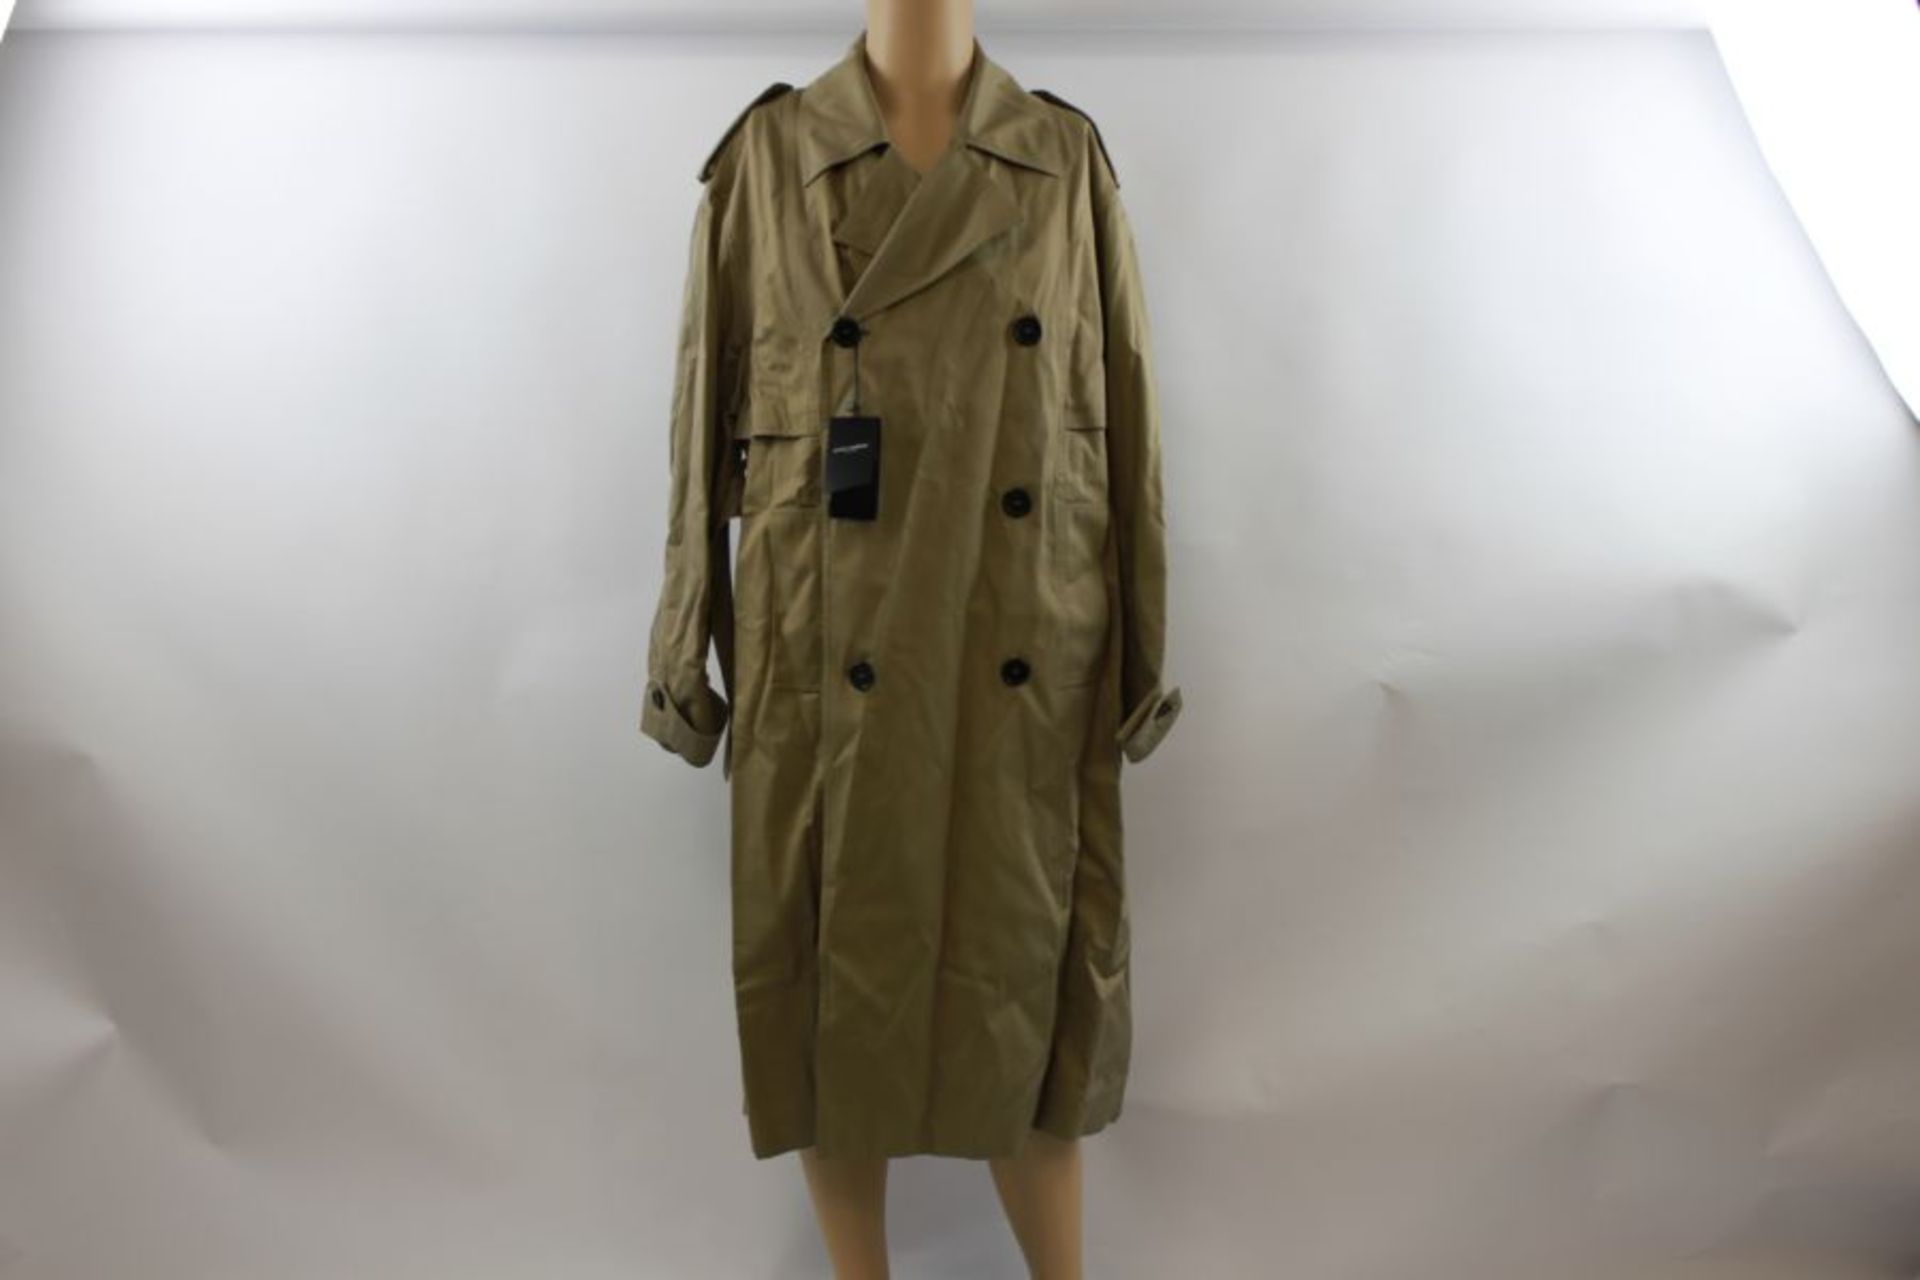 Saint Laurent Men's Double Breasted Trench Coat with Six Buttons, Belted Waist, Beige, Size M